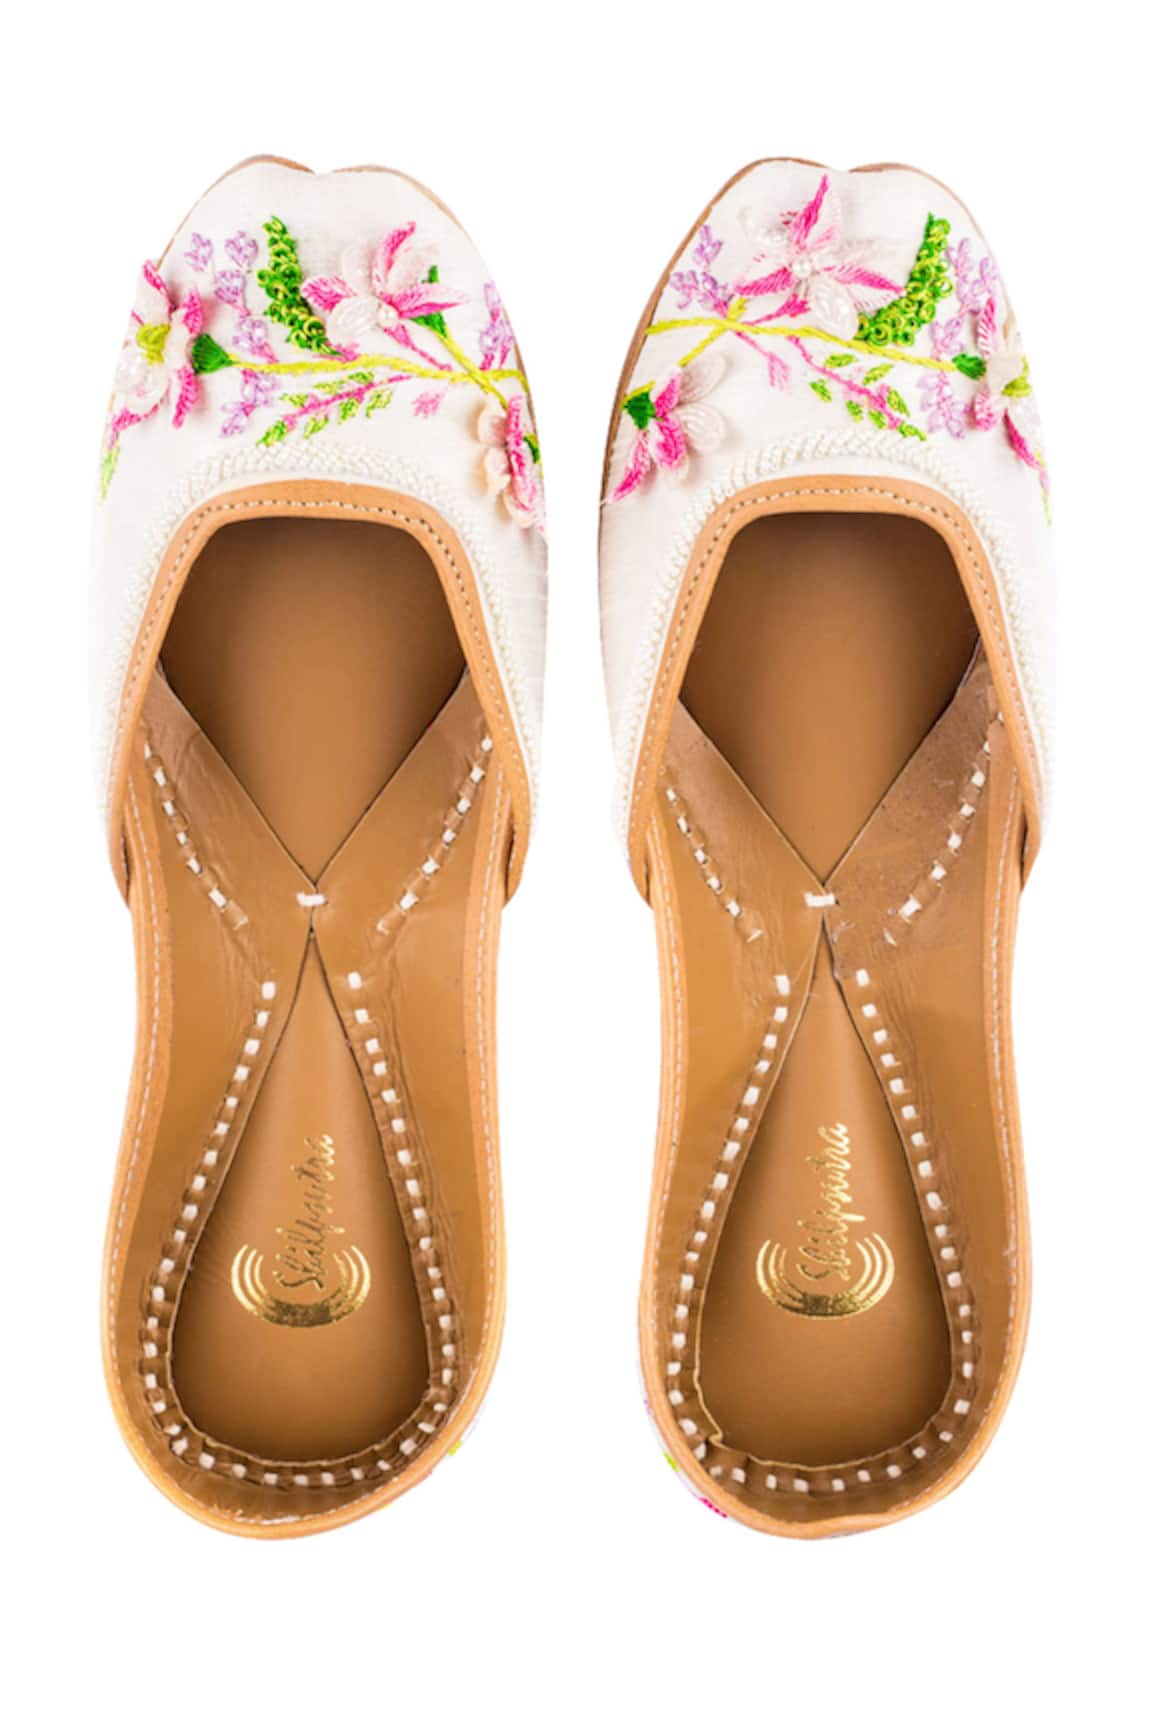 Shilpsutra Embroidered Silk Juttis